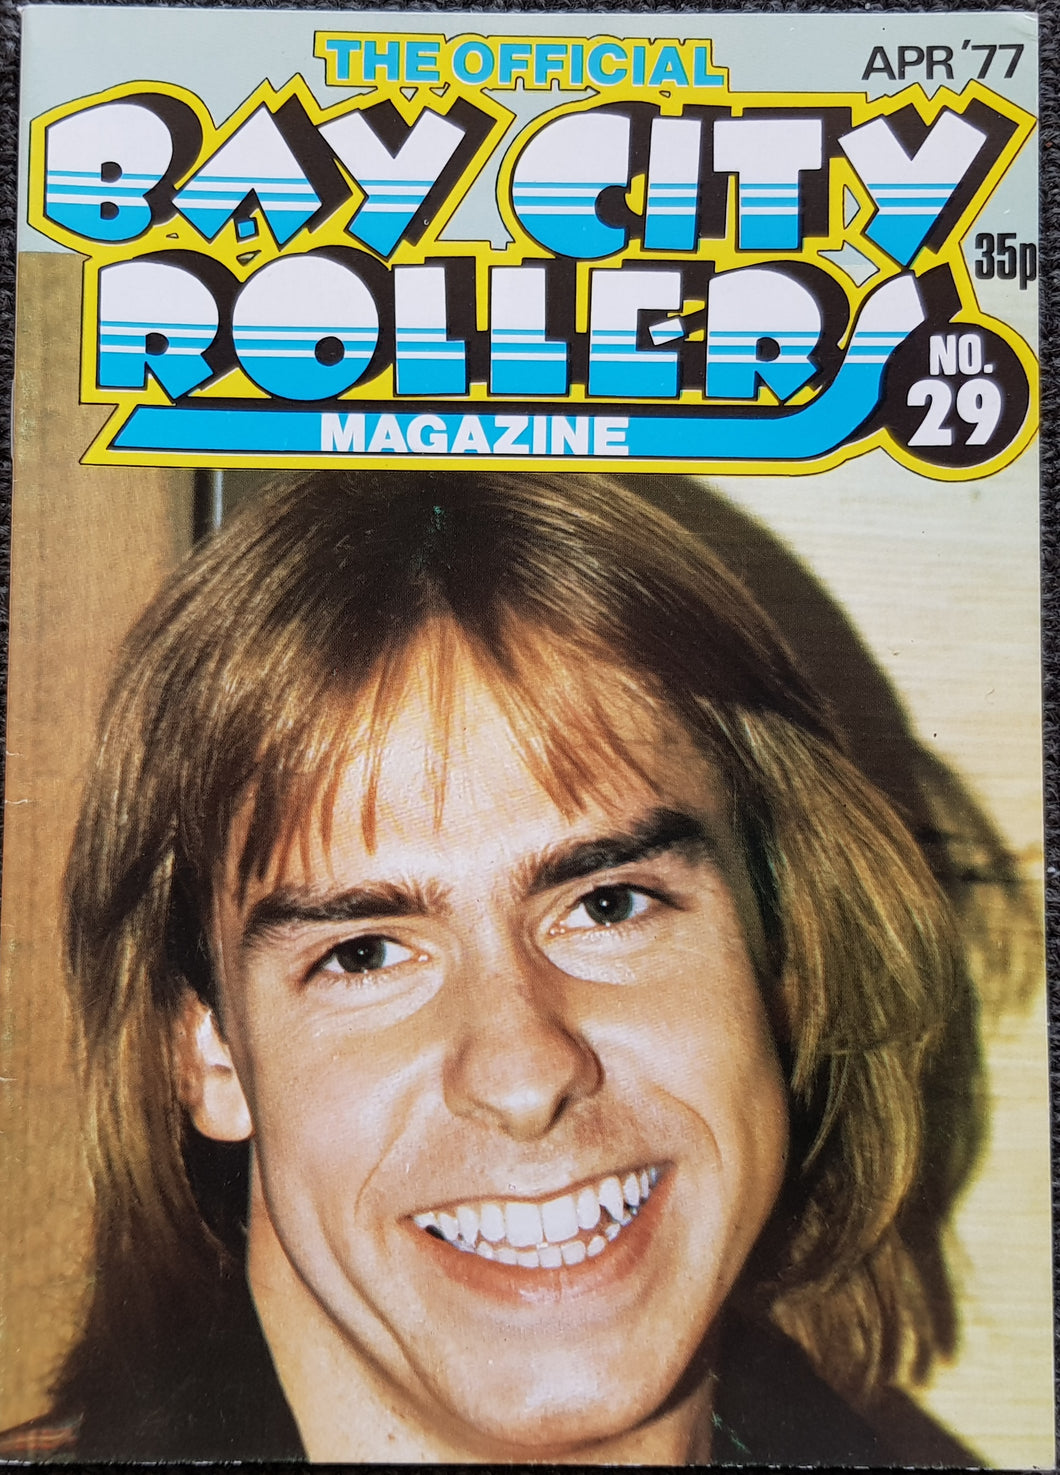 Bay City Rollers - The Official Bay City Rollers Magazine No.29